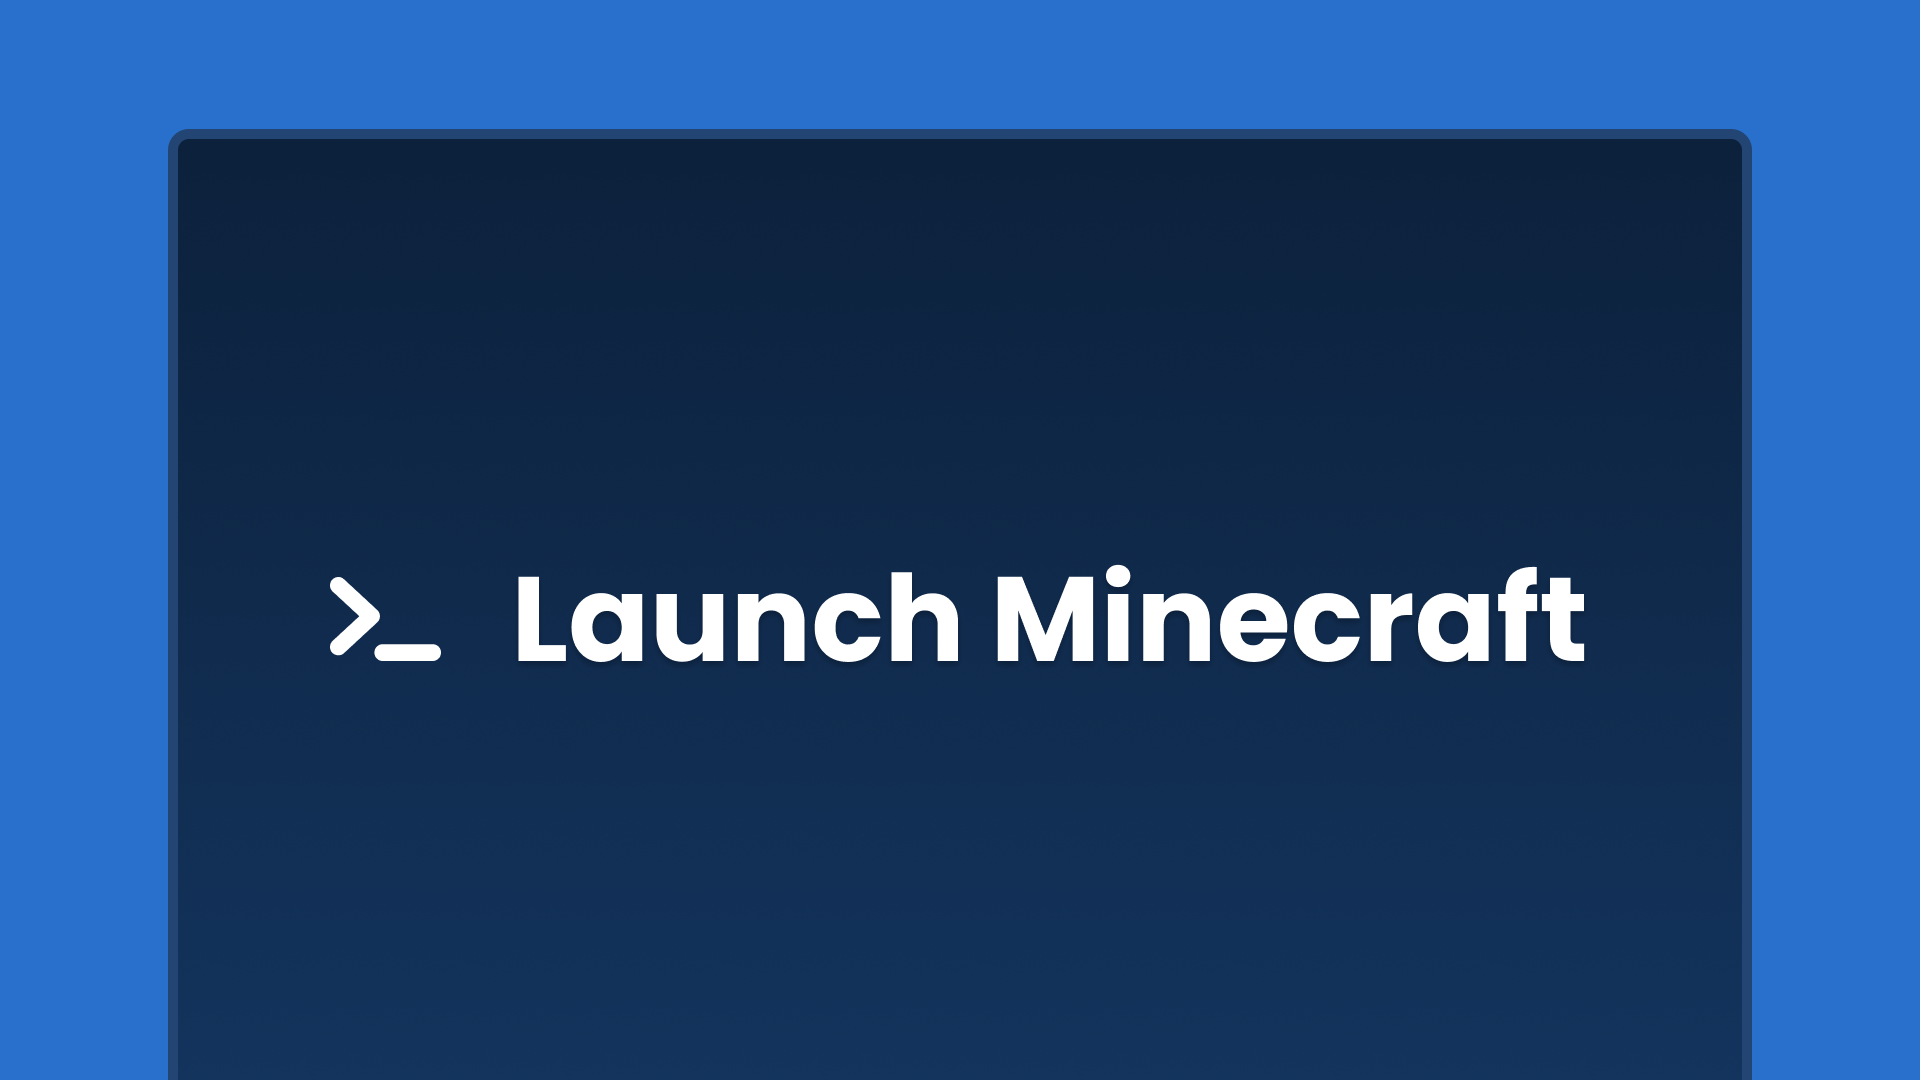 Launch Minecraft in console